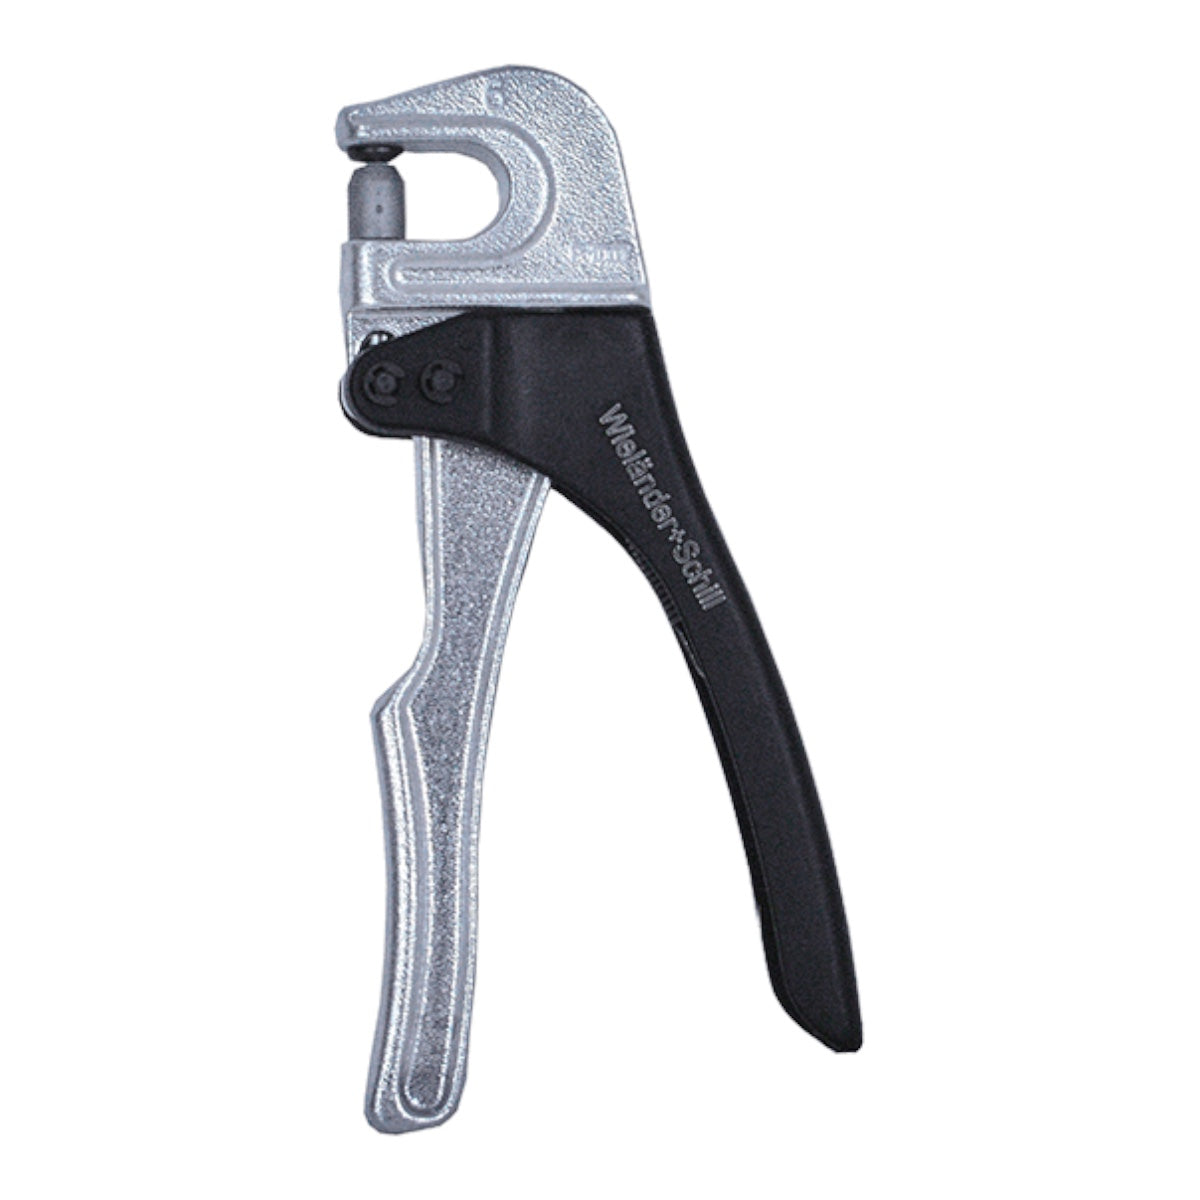 Mechanical punch pliers 6 mm – punch pliers